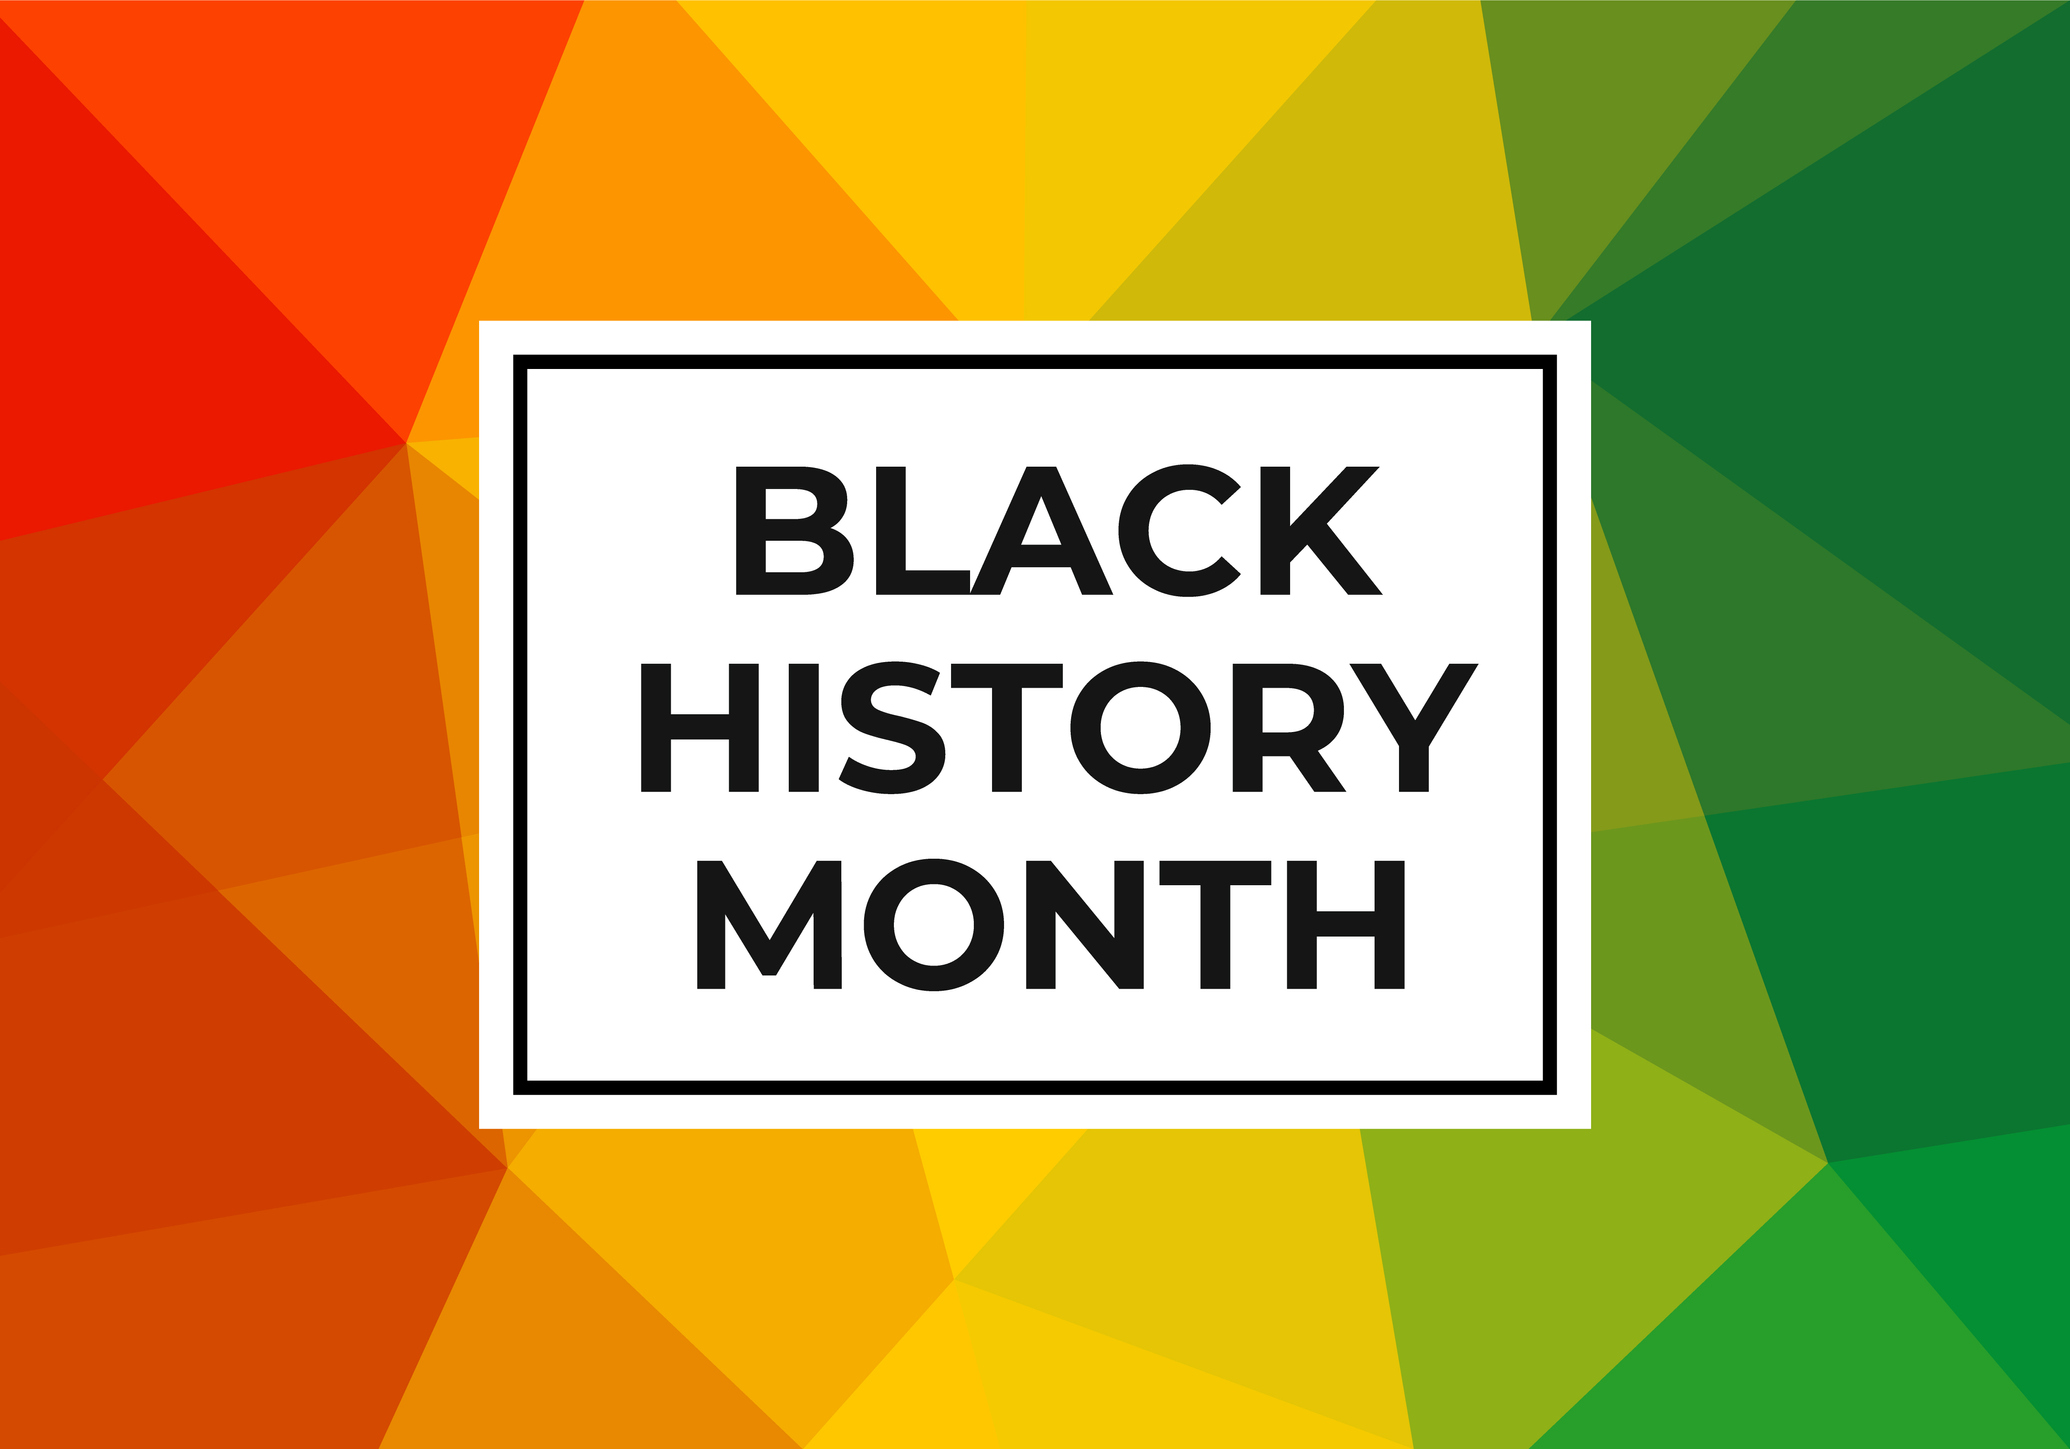 Black History Month events taking place in London, Ont. - London